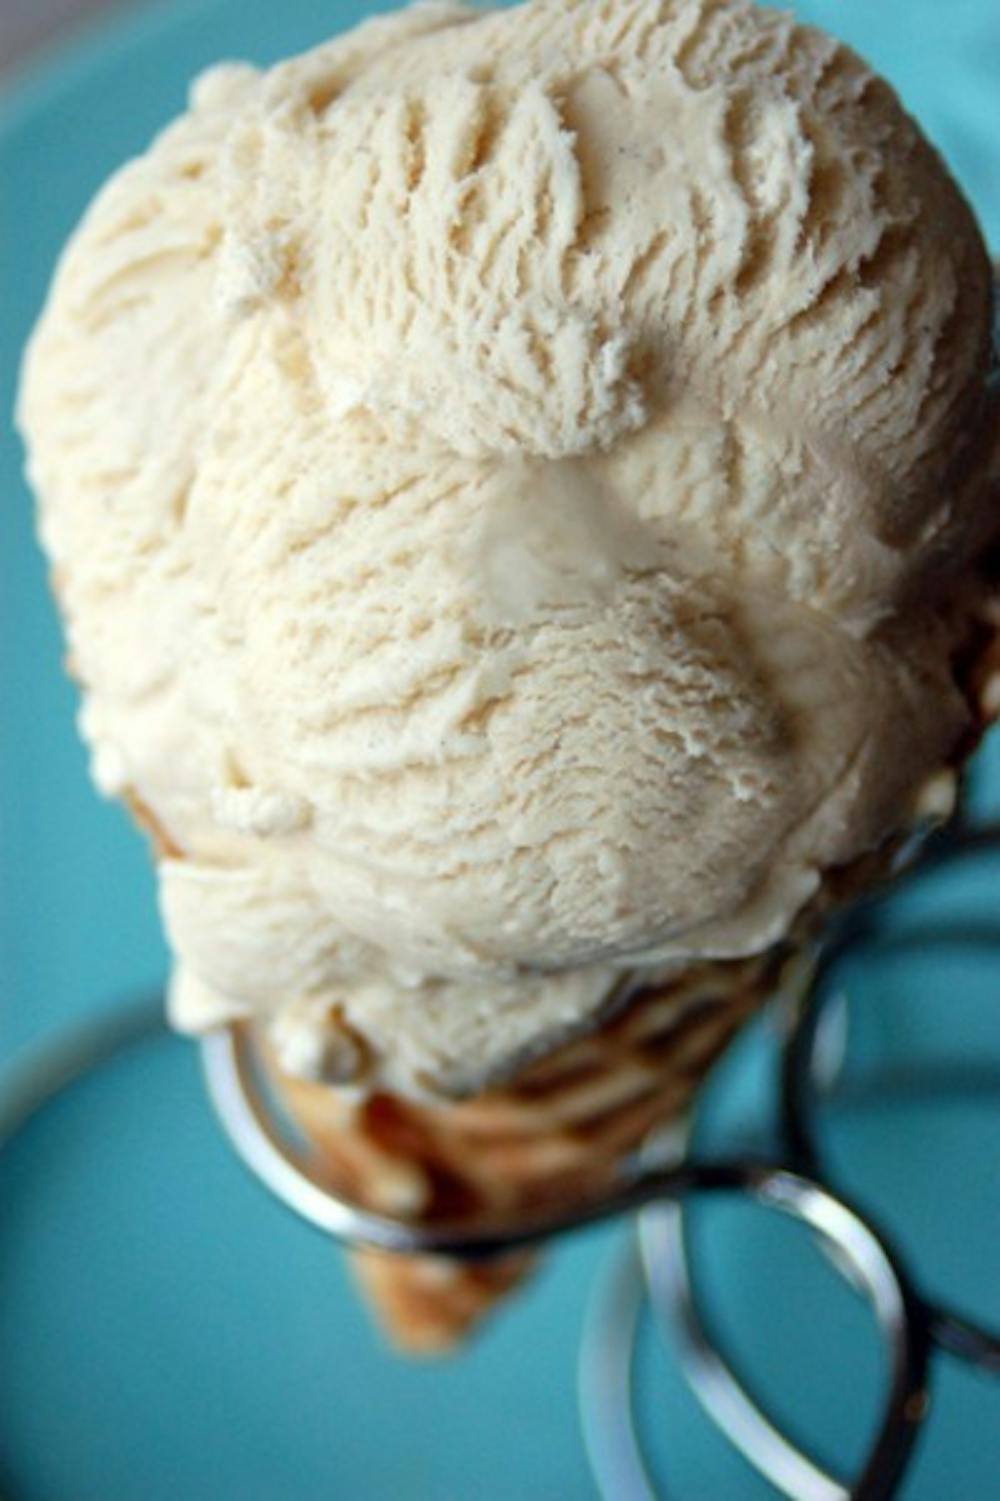 <p>A scoop of organic, dairy-based cardamom ice cream at Karma Cream. The organic ice cream cafe offers a natural spin on favorite treats.</p>